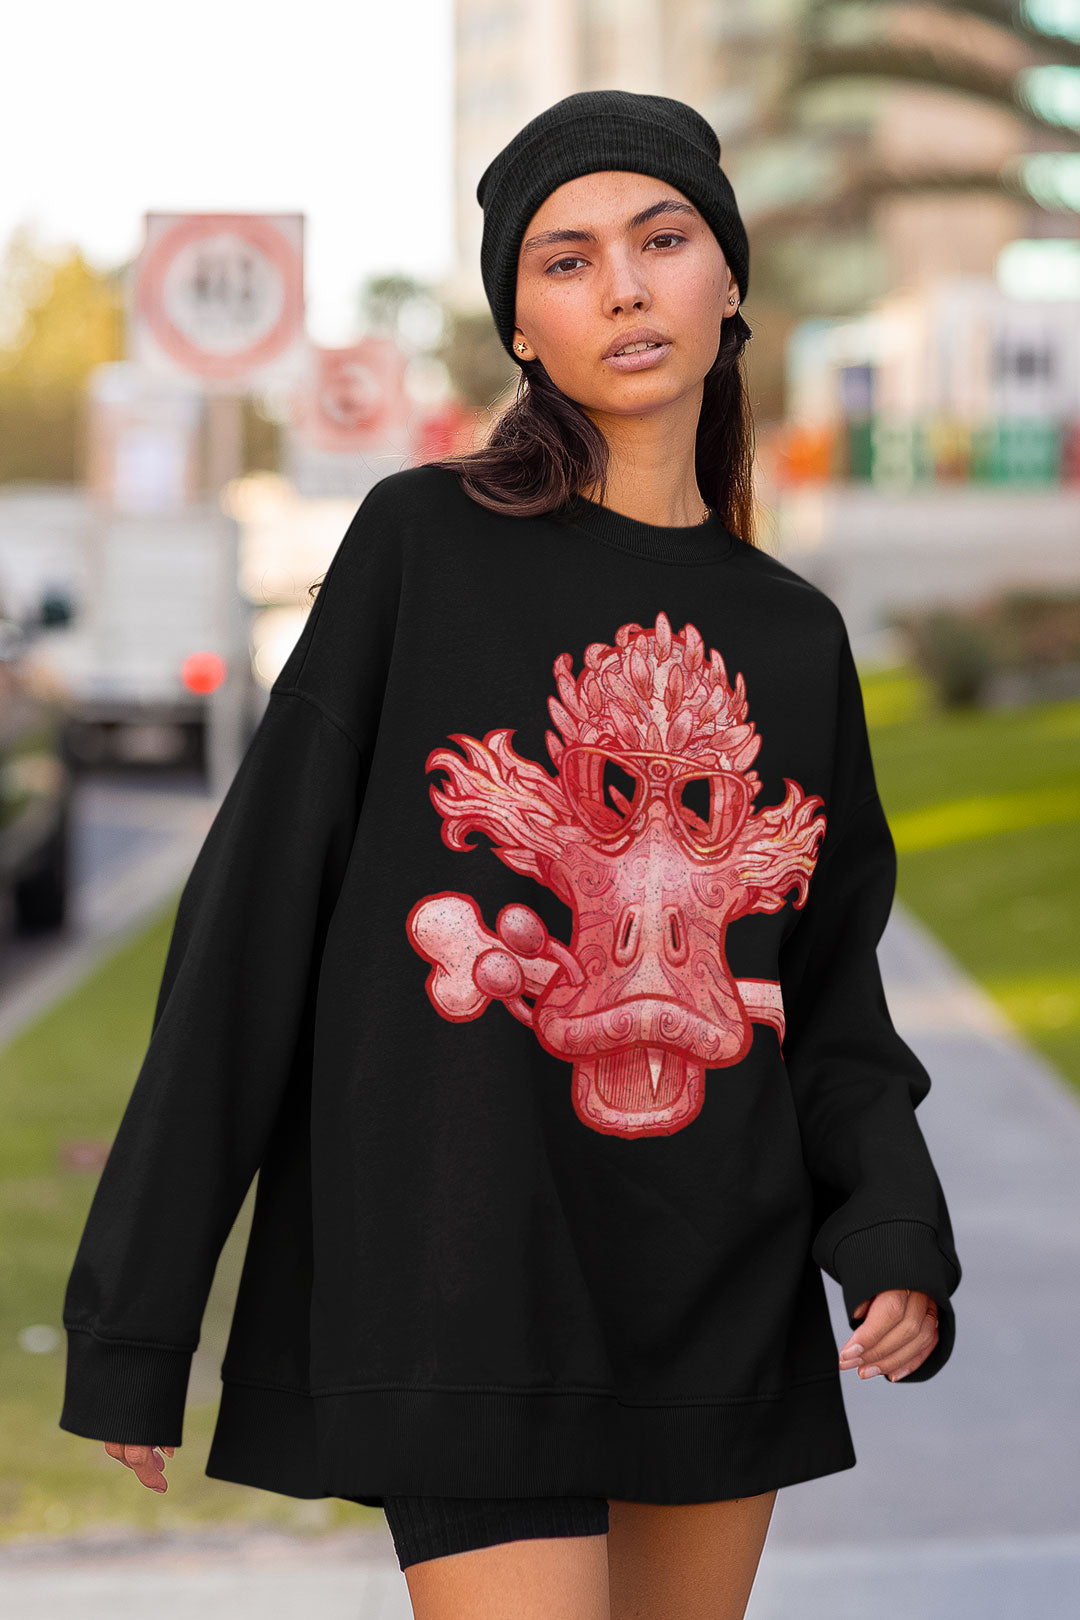 A sturdy and warm Red Motorcycle Skull No 008 Sweatshirt bound to keep you warm in the colder months. A pre-shrunk, classic fit sweater that's made with air-jet spun yarn for a soft feel and reduced pilling.